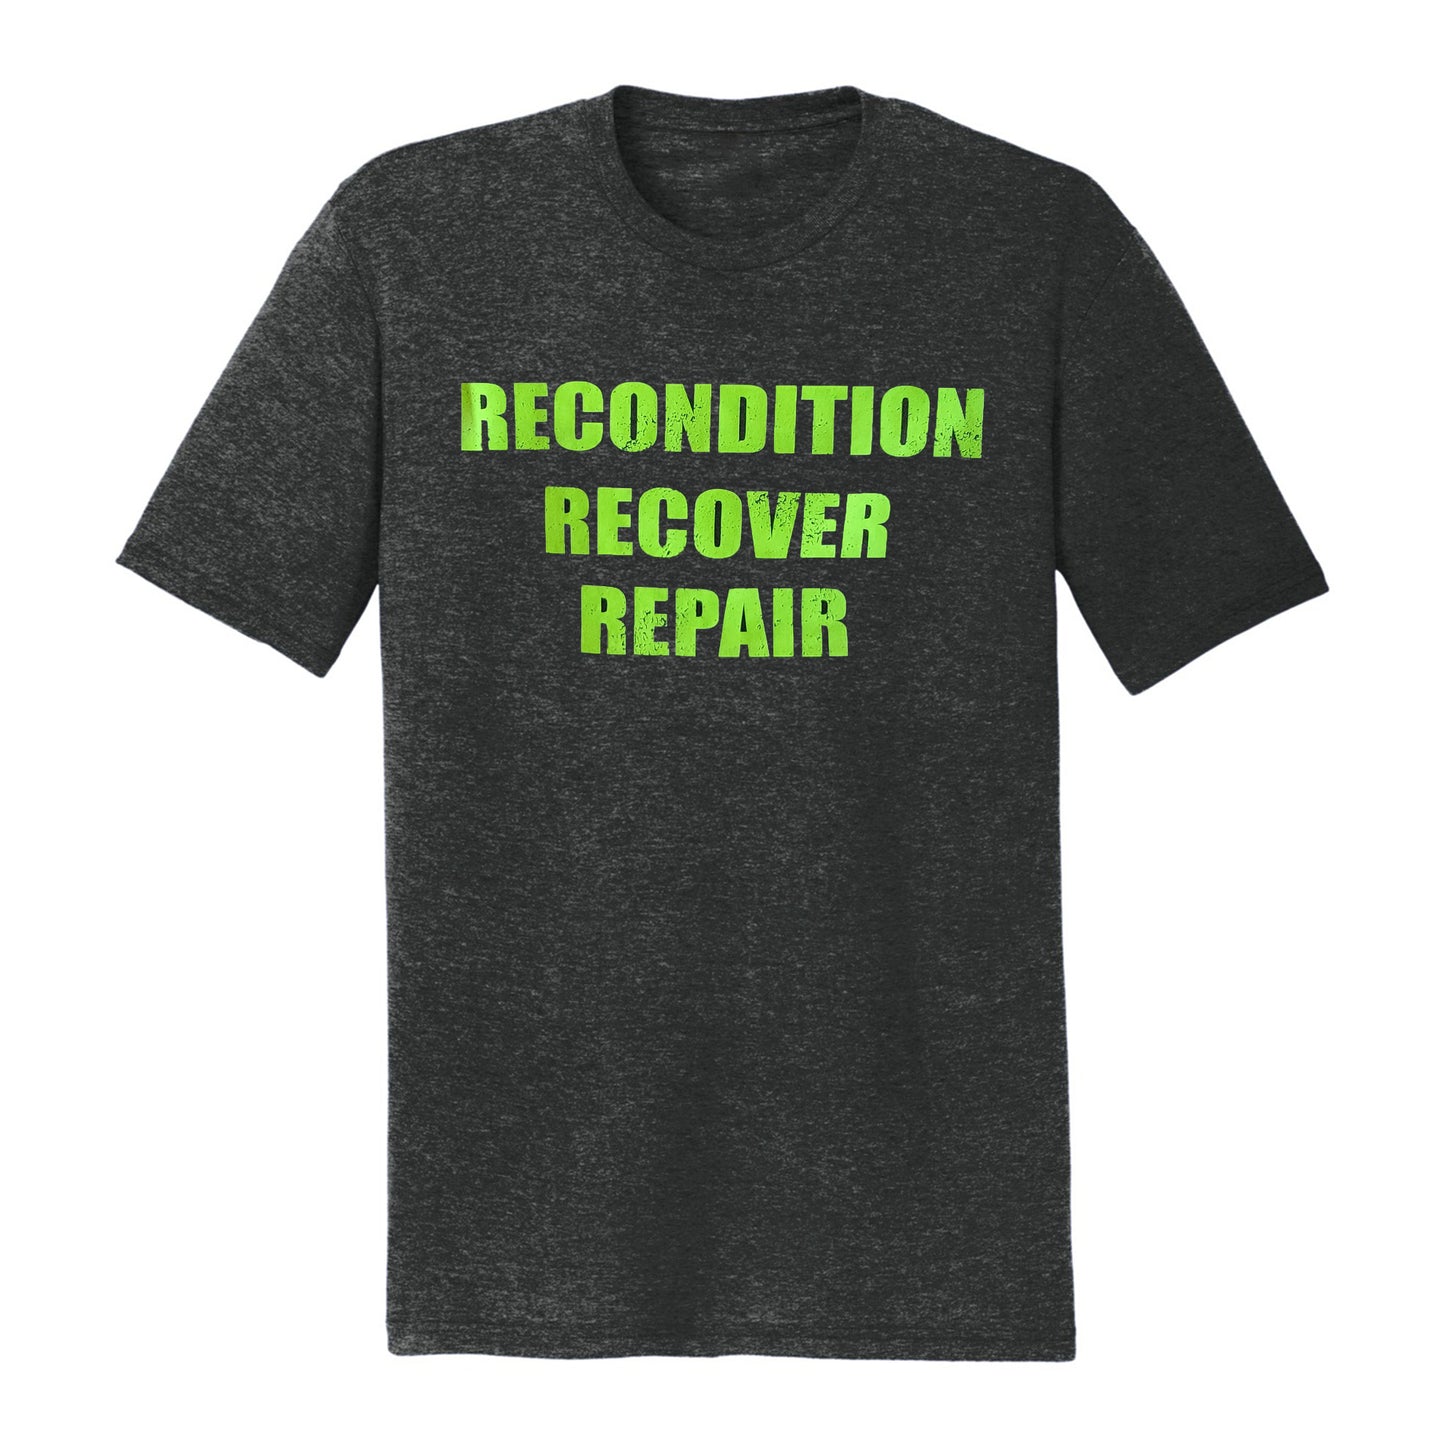 RECOGNITION RECOVERY REPAIR UNISEX T-SHIRT PRO BLEND